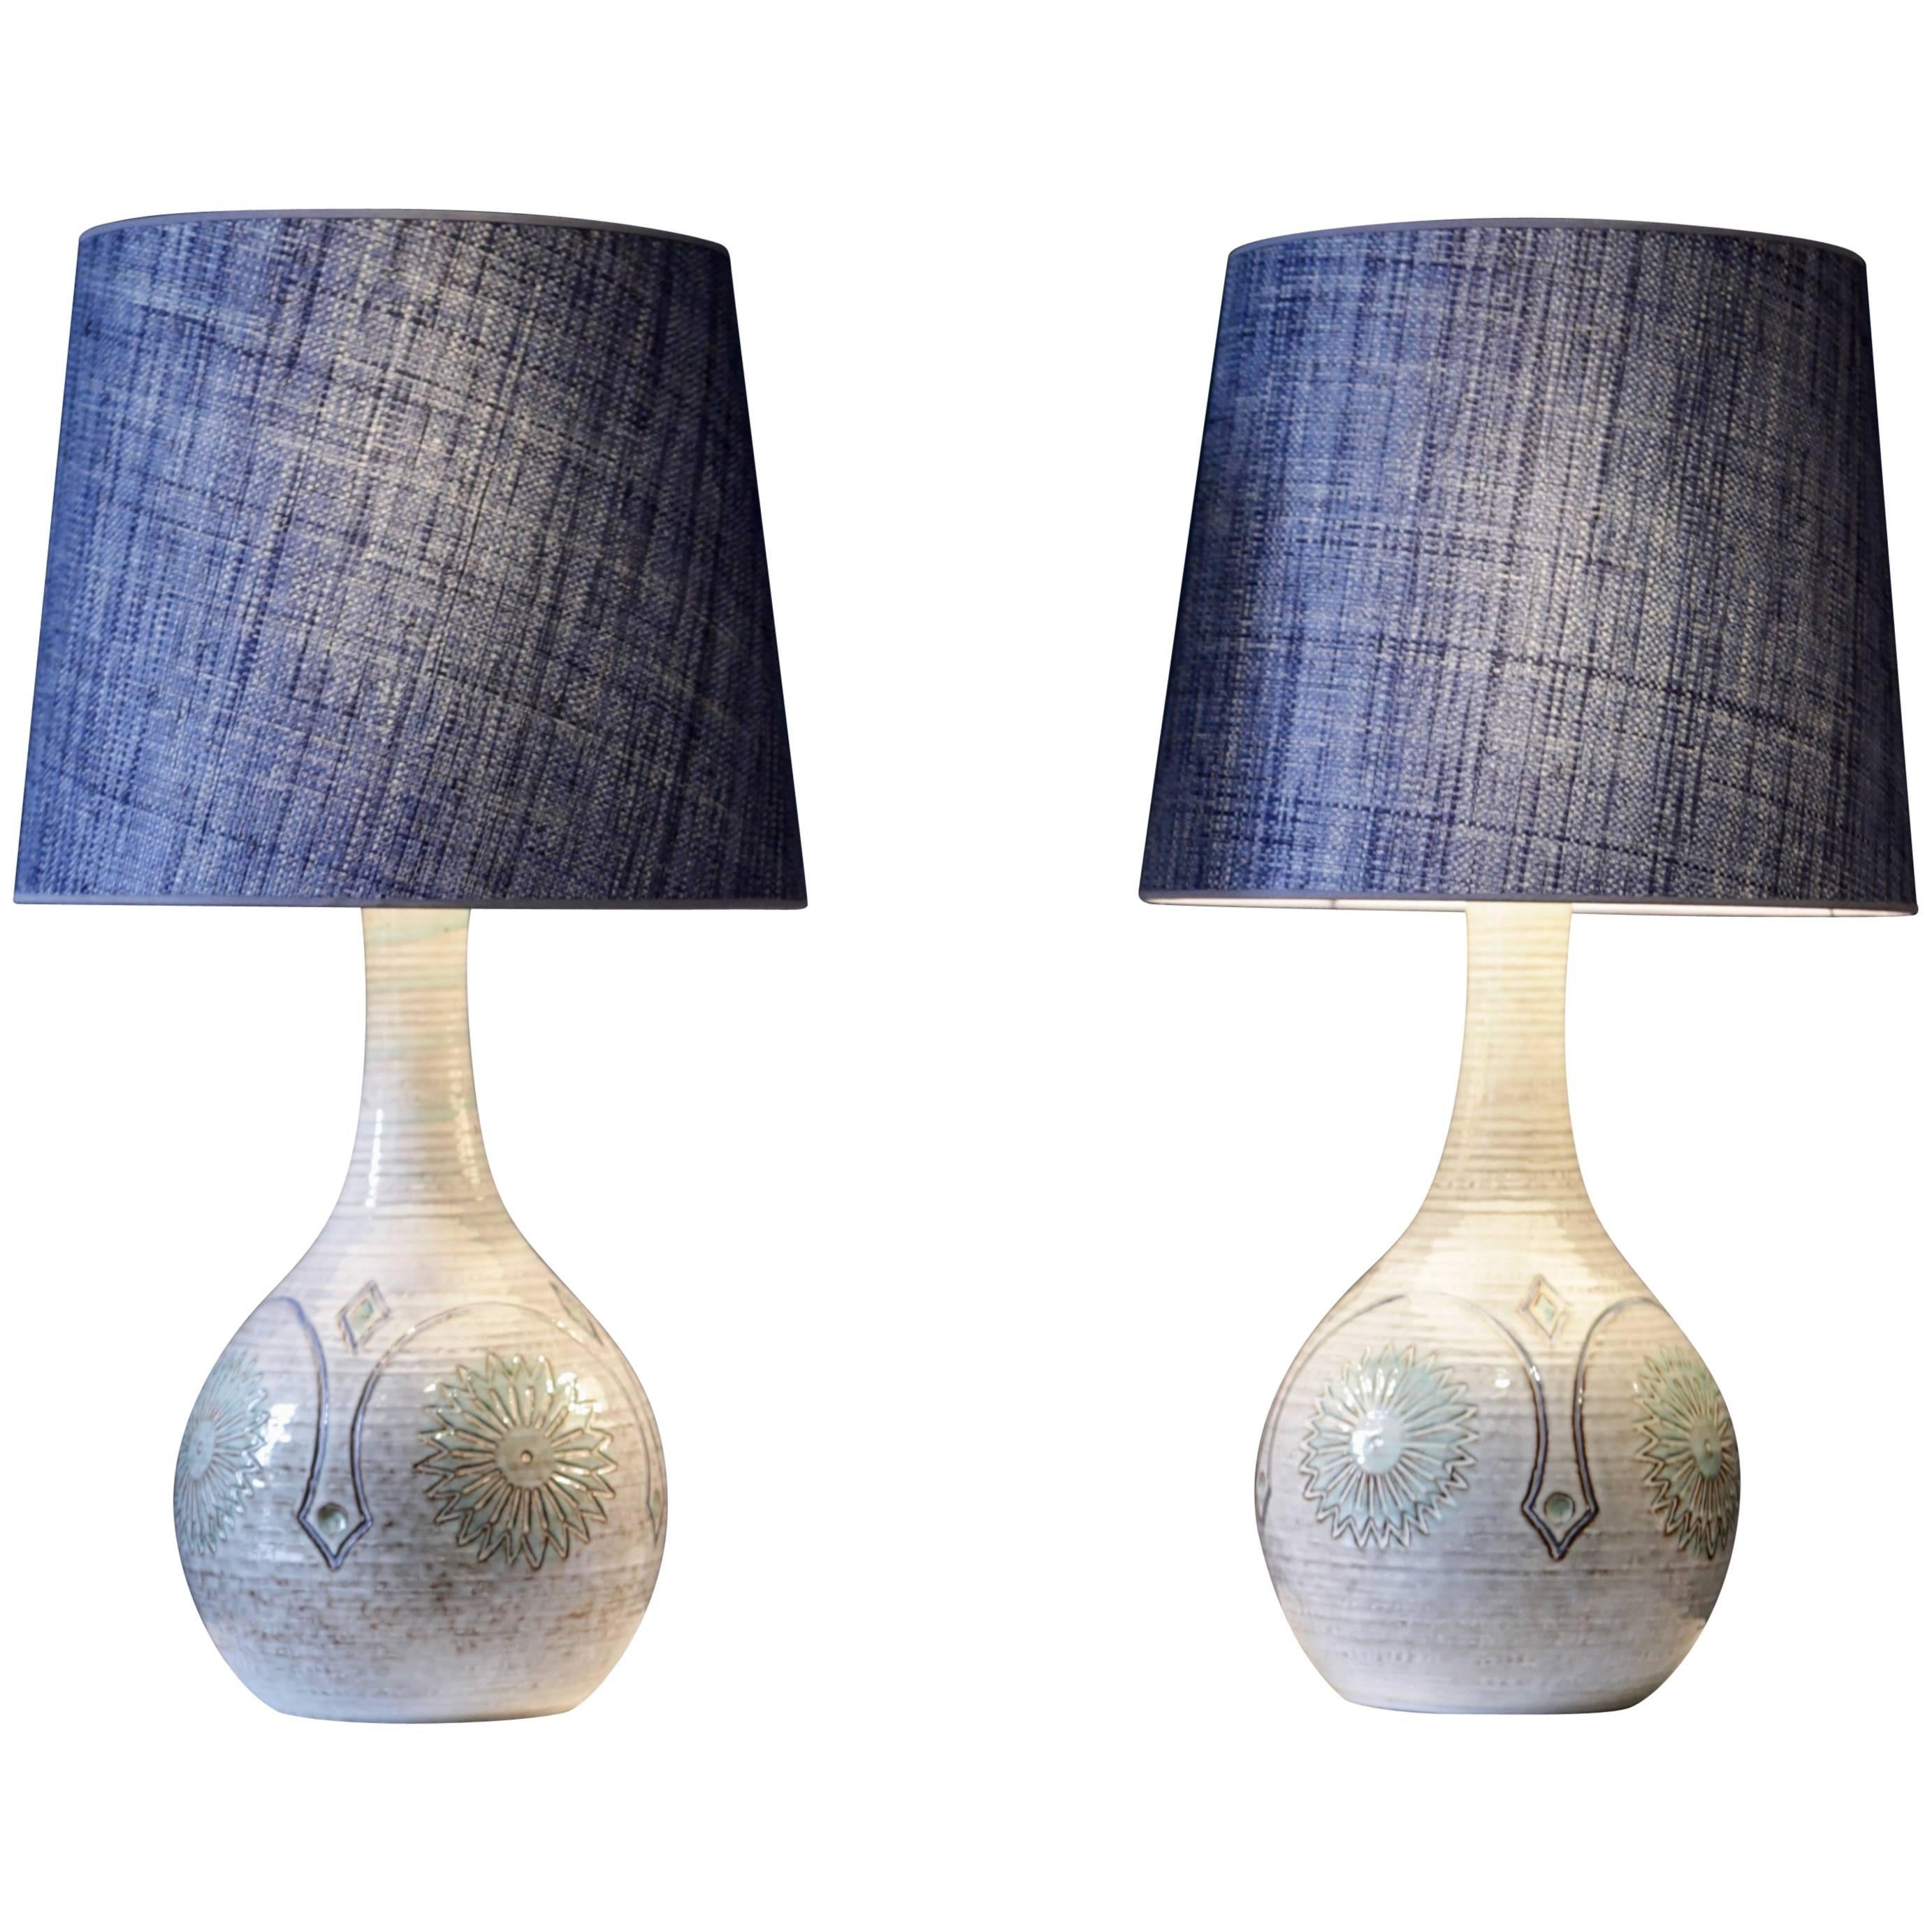 Pair of Large Danish Stoneware Table Lamps with Denim Blue Raffia Shades, 1960